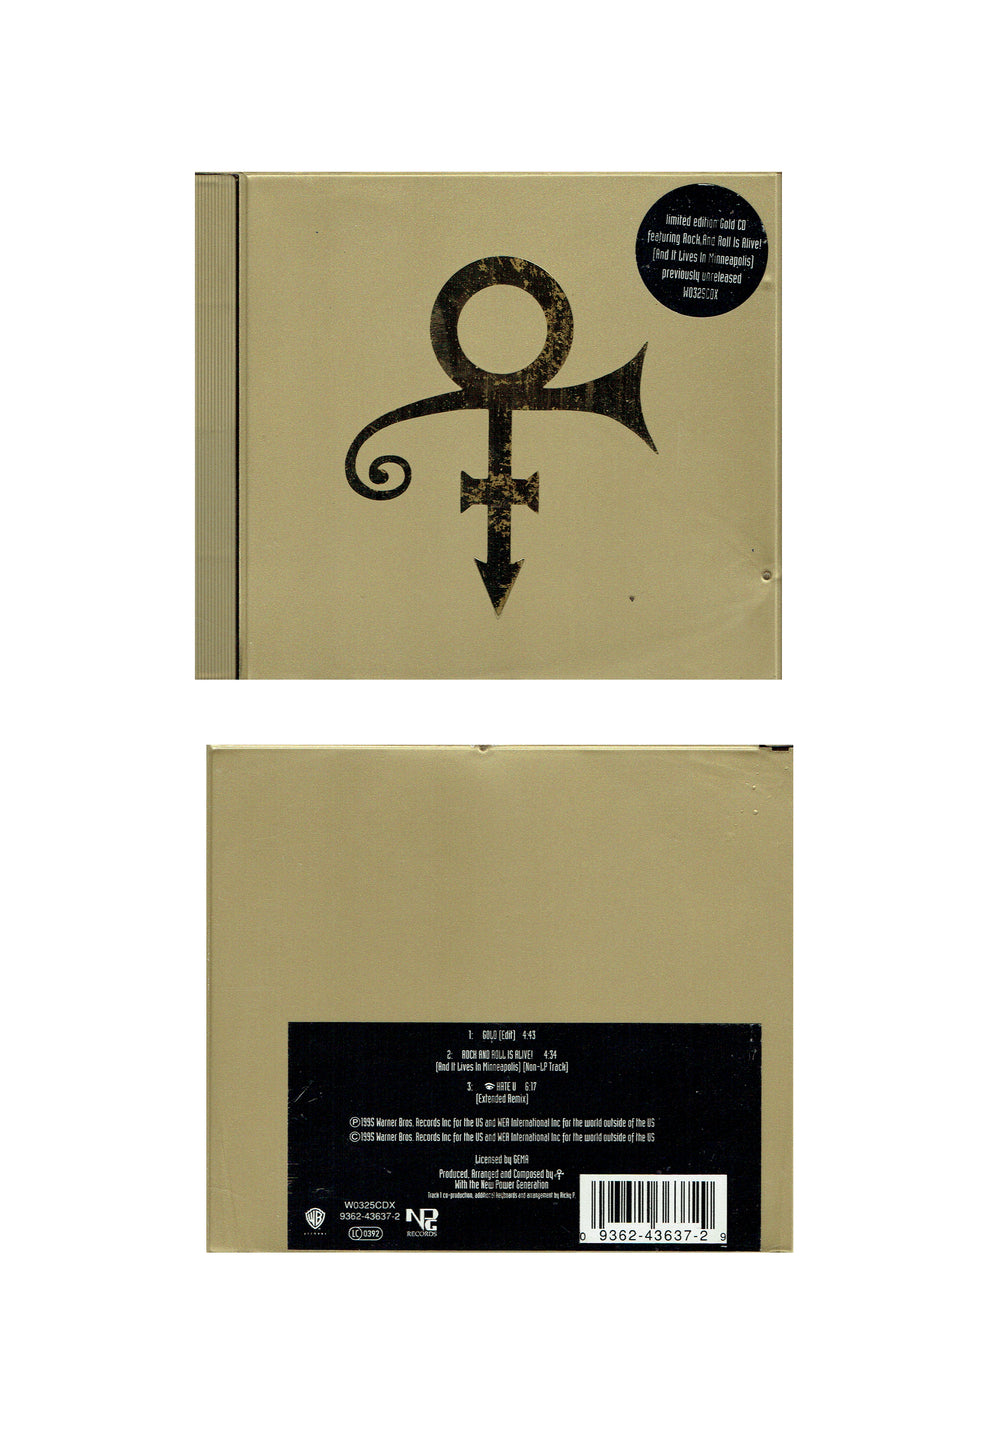 Prince – O(+> Gold Rock And Roll Is Alive CD Single Gold Ed UK Preloved:1995